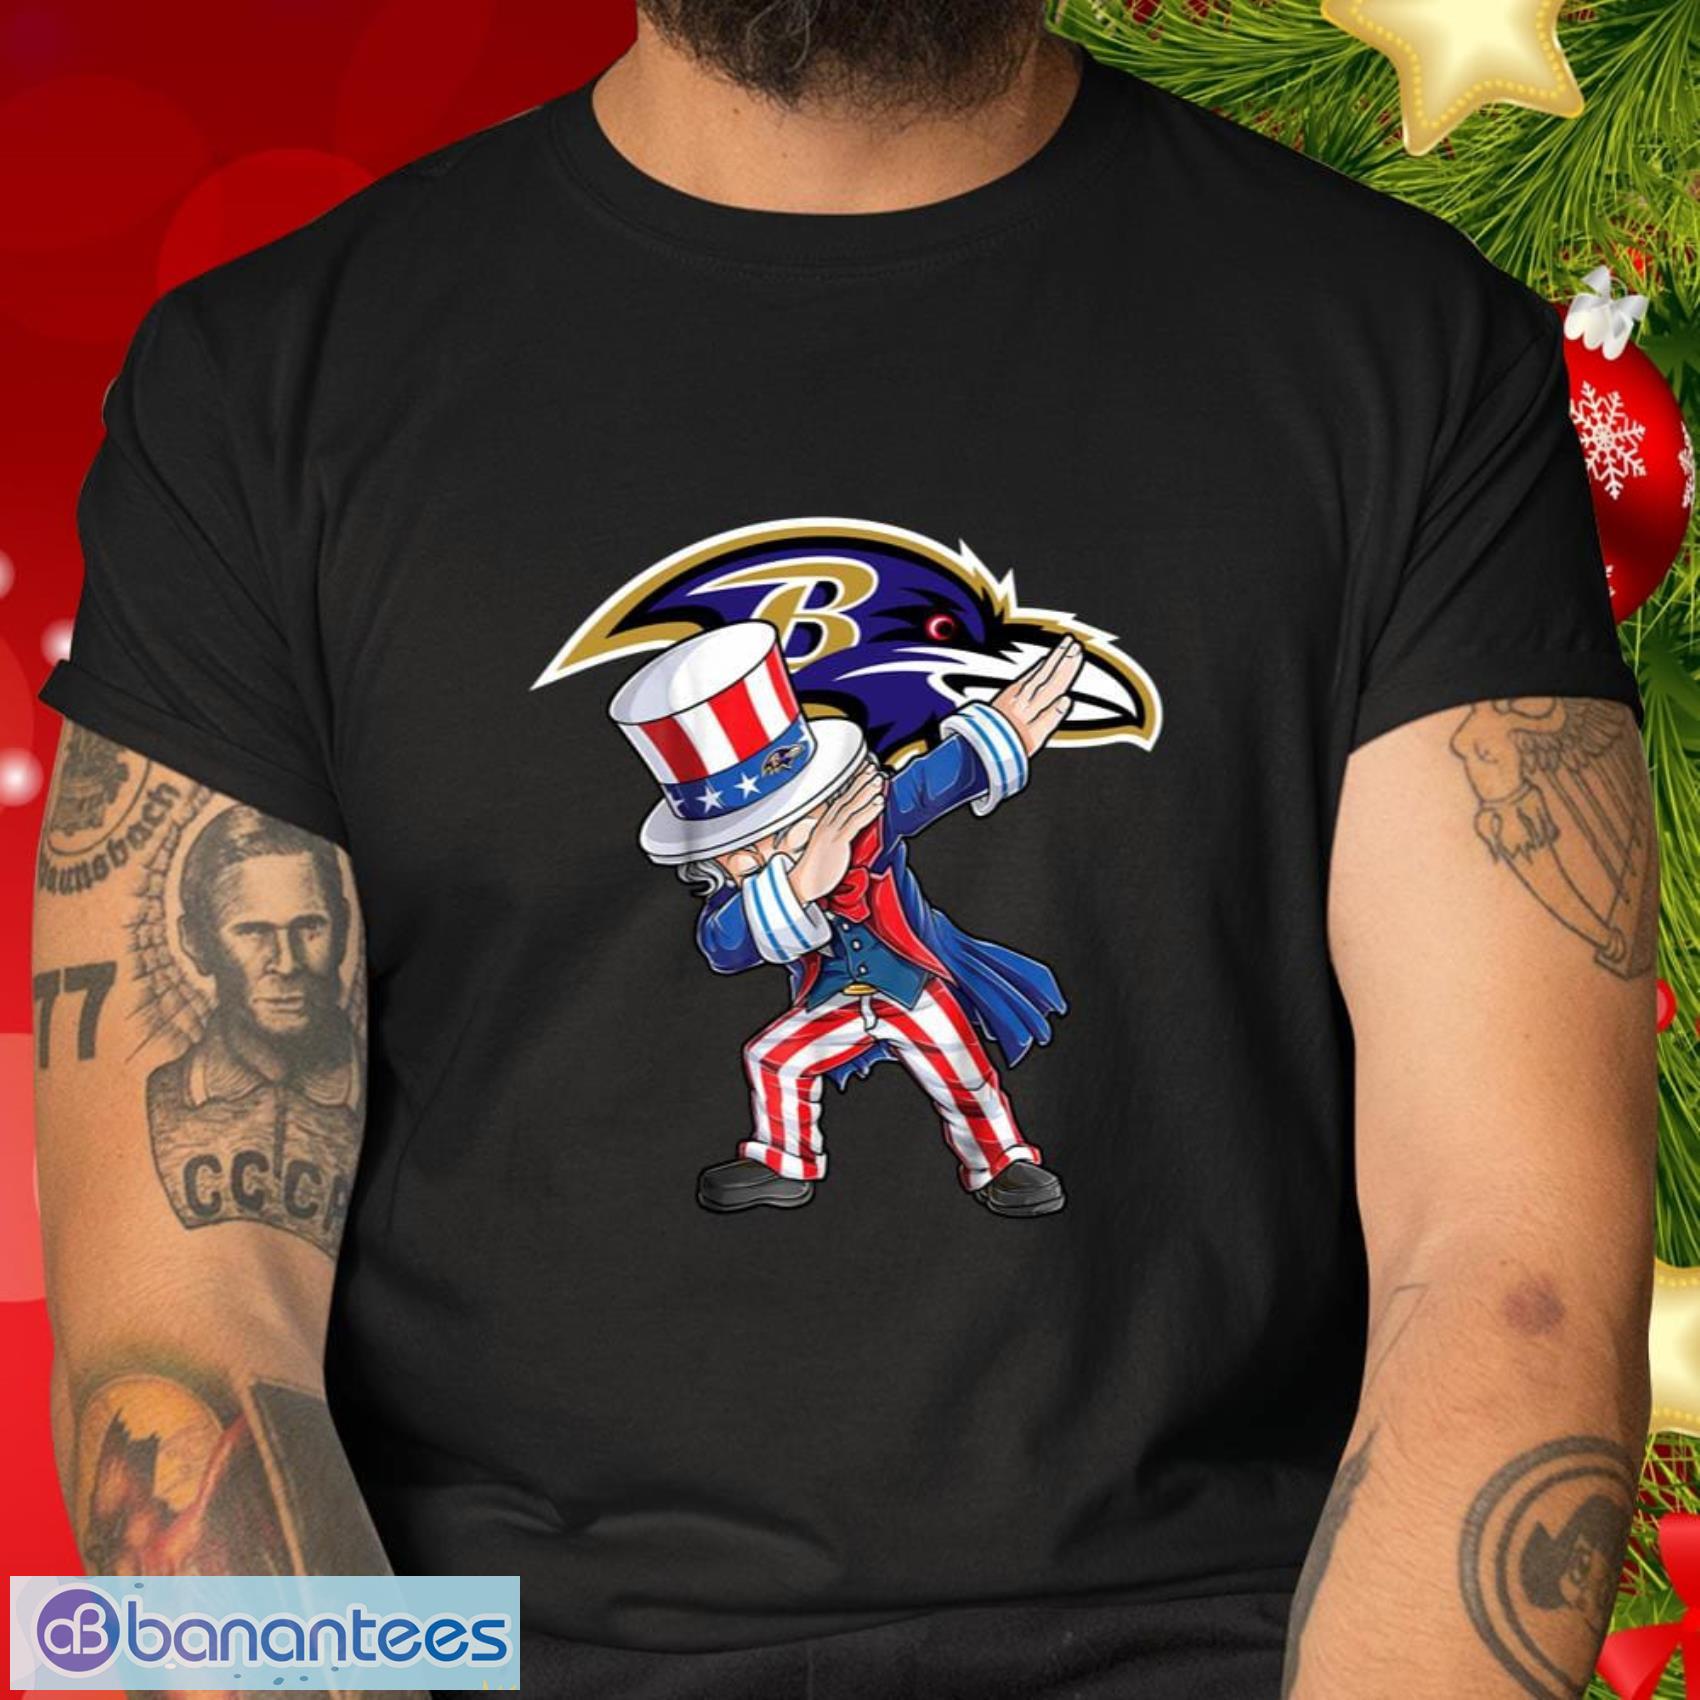 Baltimore Ravens NFL Football Gift Fr Fans Dabbing Uncle Sam The Fourth of July T Shirt - Baltimore Ravens NFL Football Dabbing Uncle Sam The Fourth of July T Shirt_2